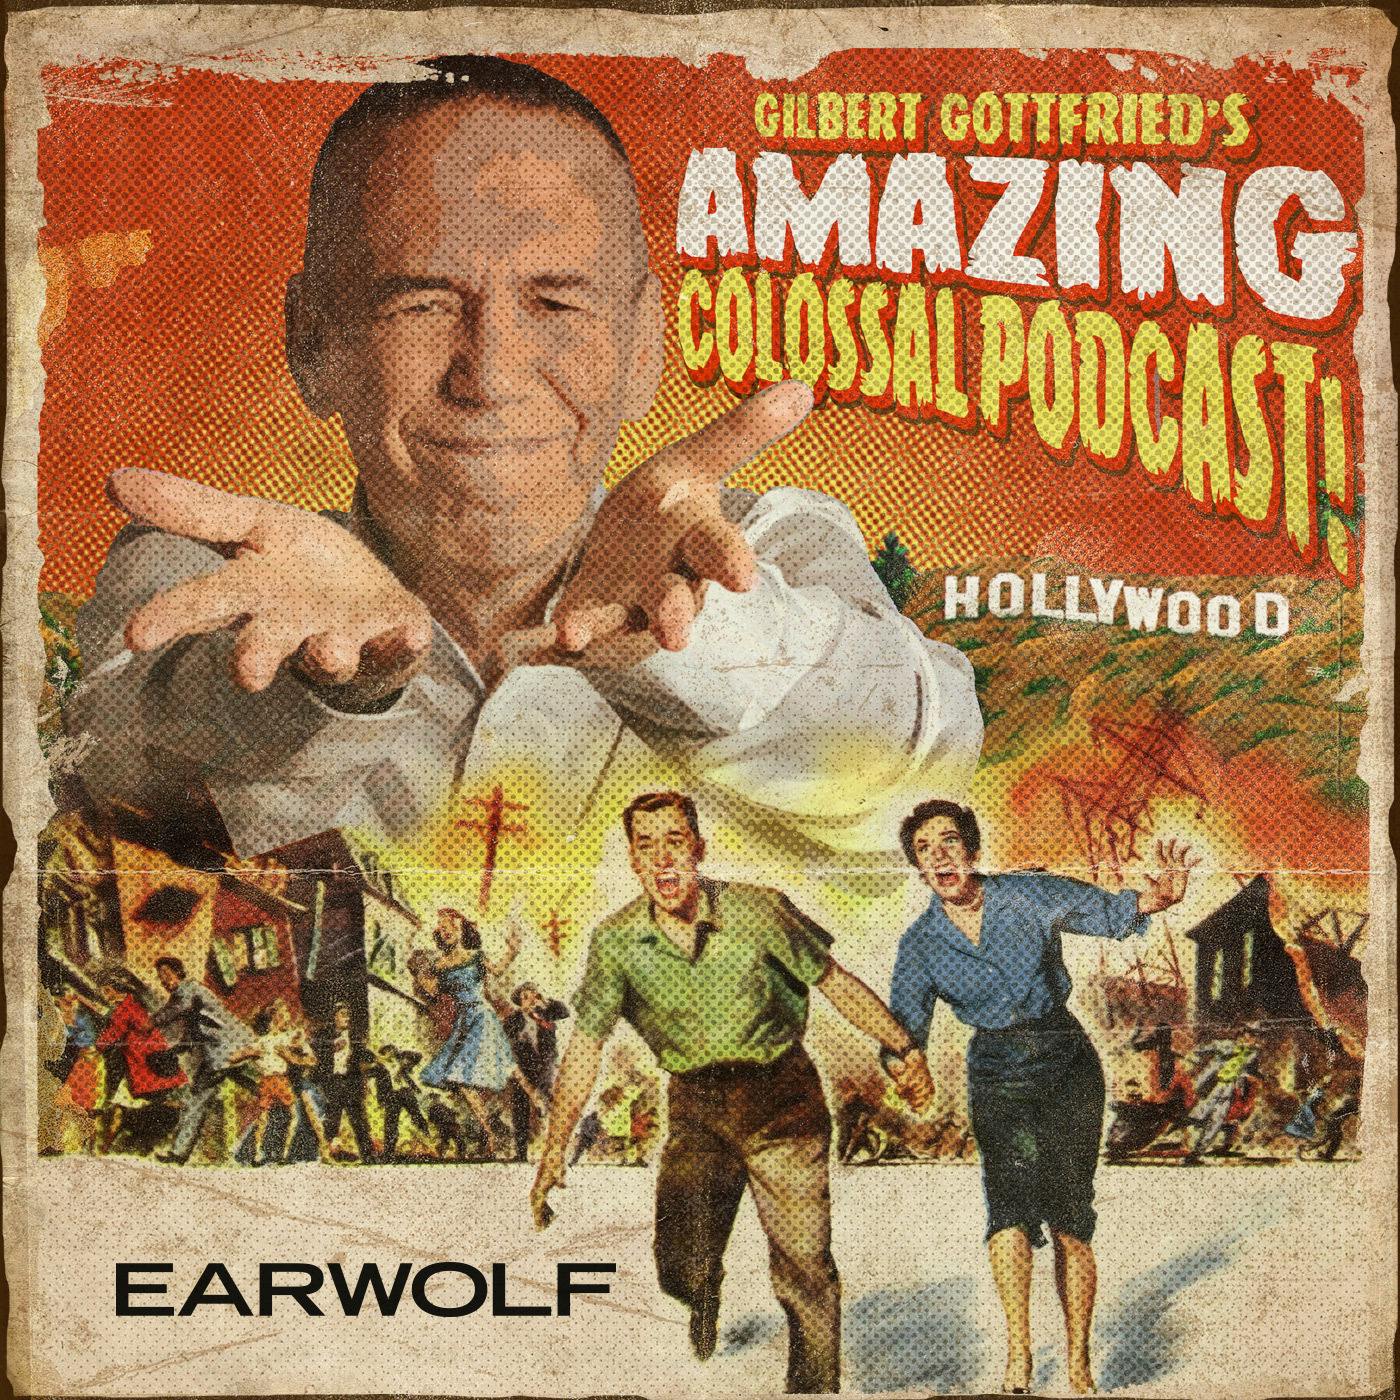 Find Full Archive of Gilbert Gottfried's Amazing Colossal Podcast on Stitcher Premium